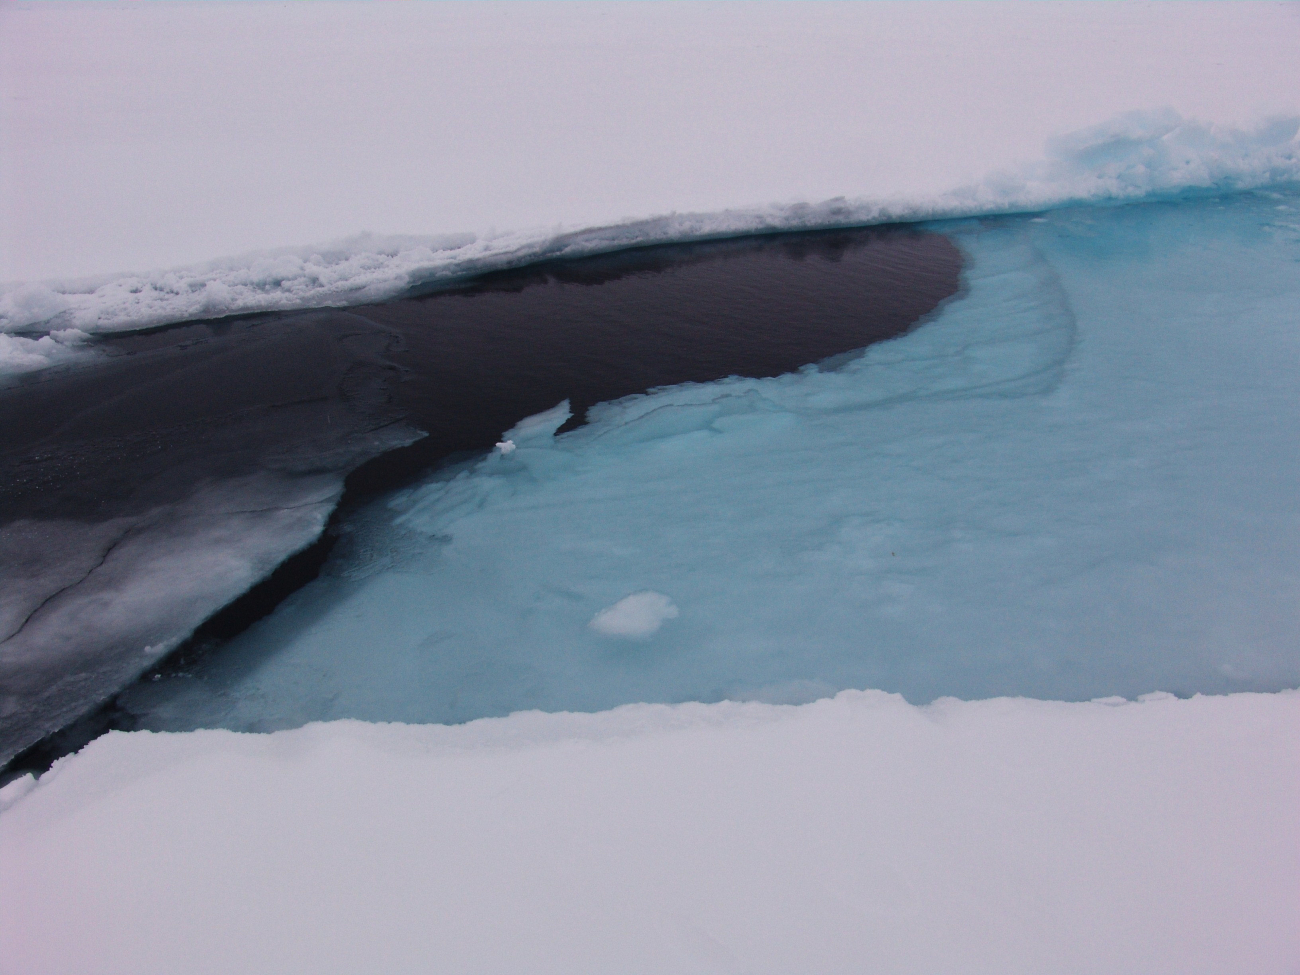 Snow surface of piece of an ice floe that has been pushed under water by thereclosing of a lead